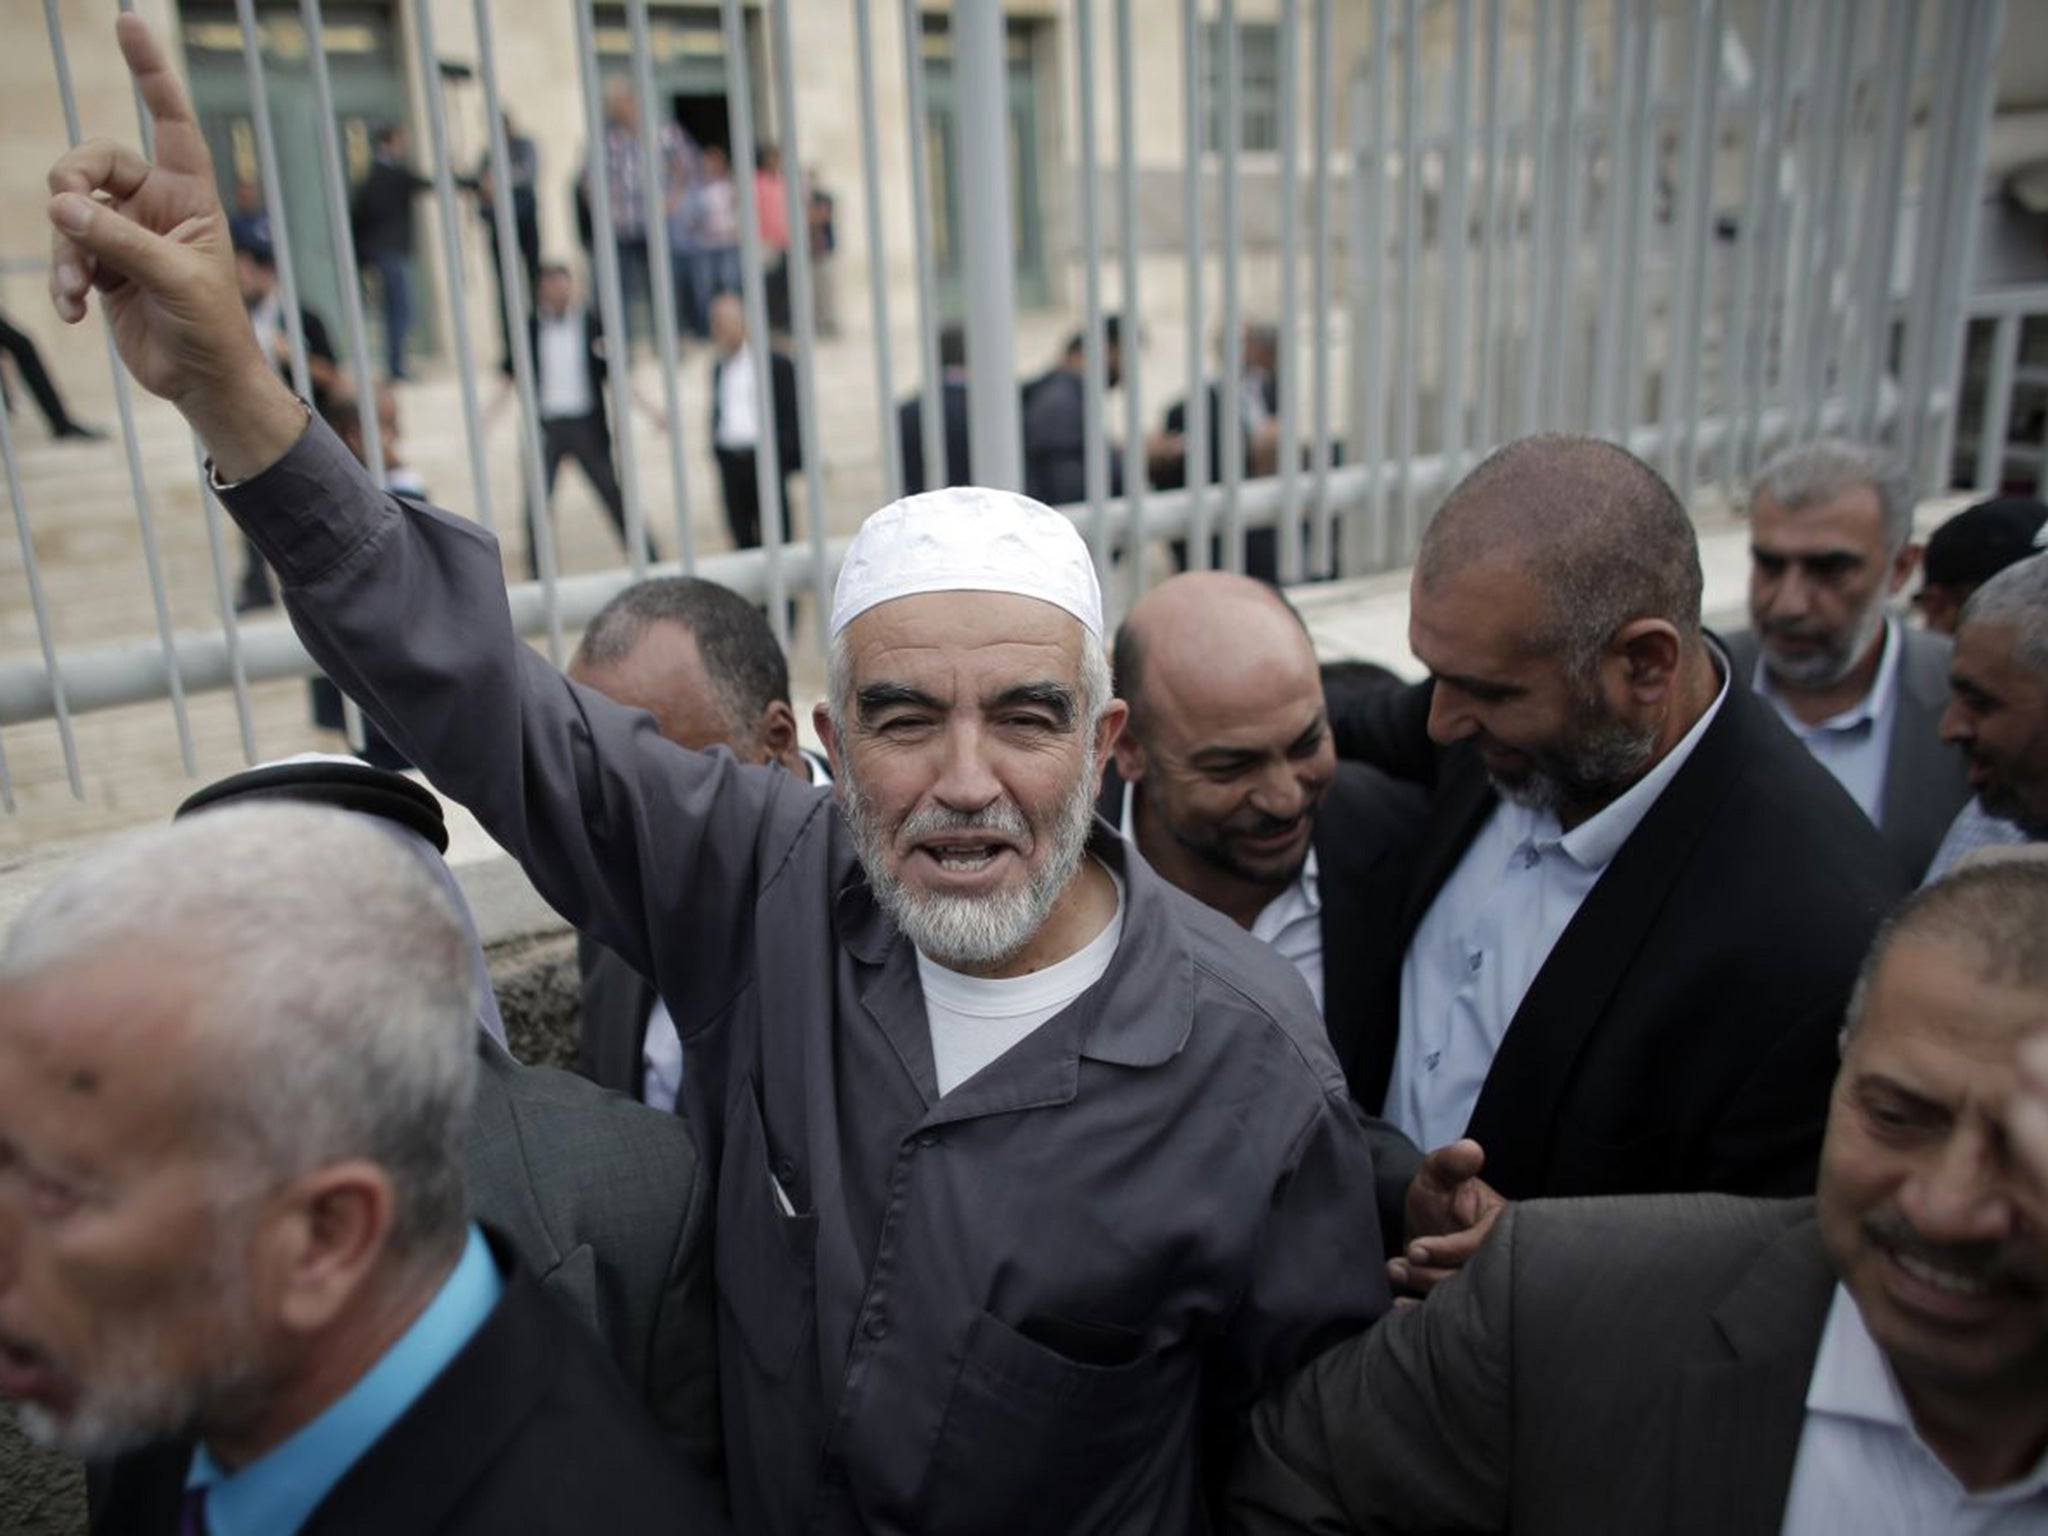 Raed Salah, the head of the radical northern wing of the Islamic Movement in Israel